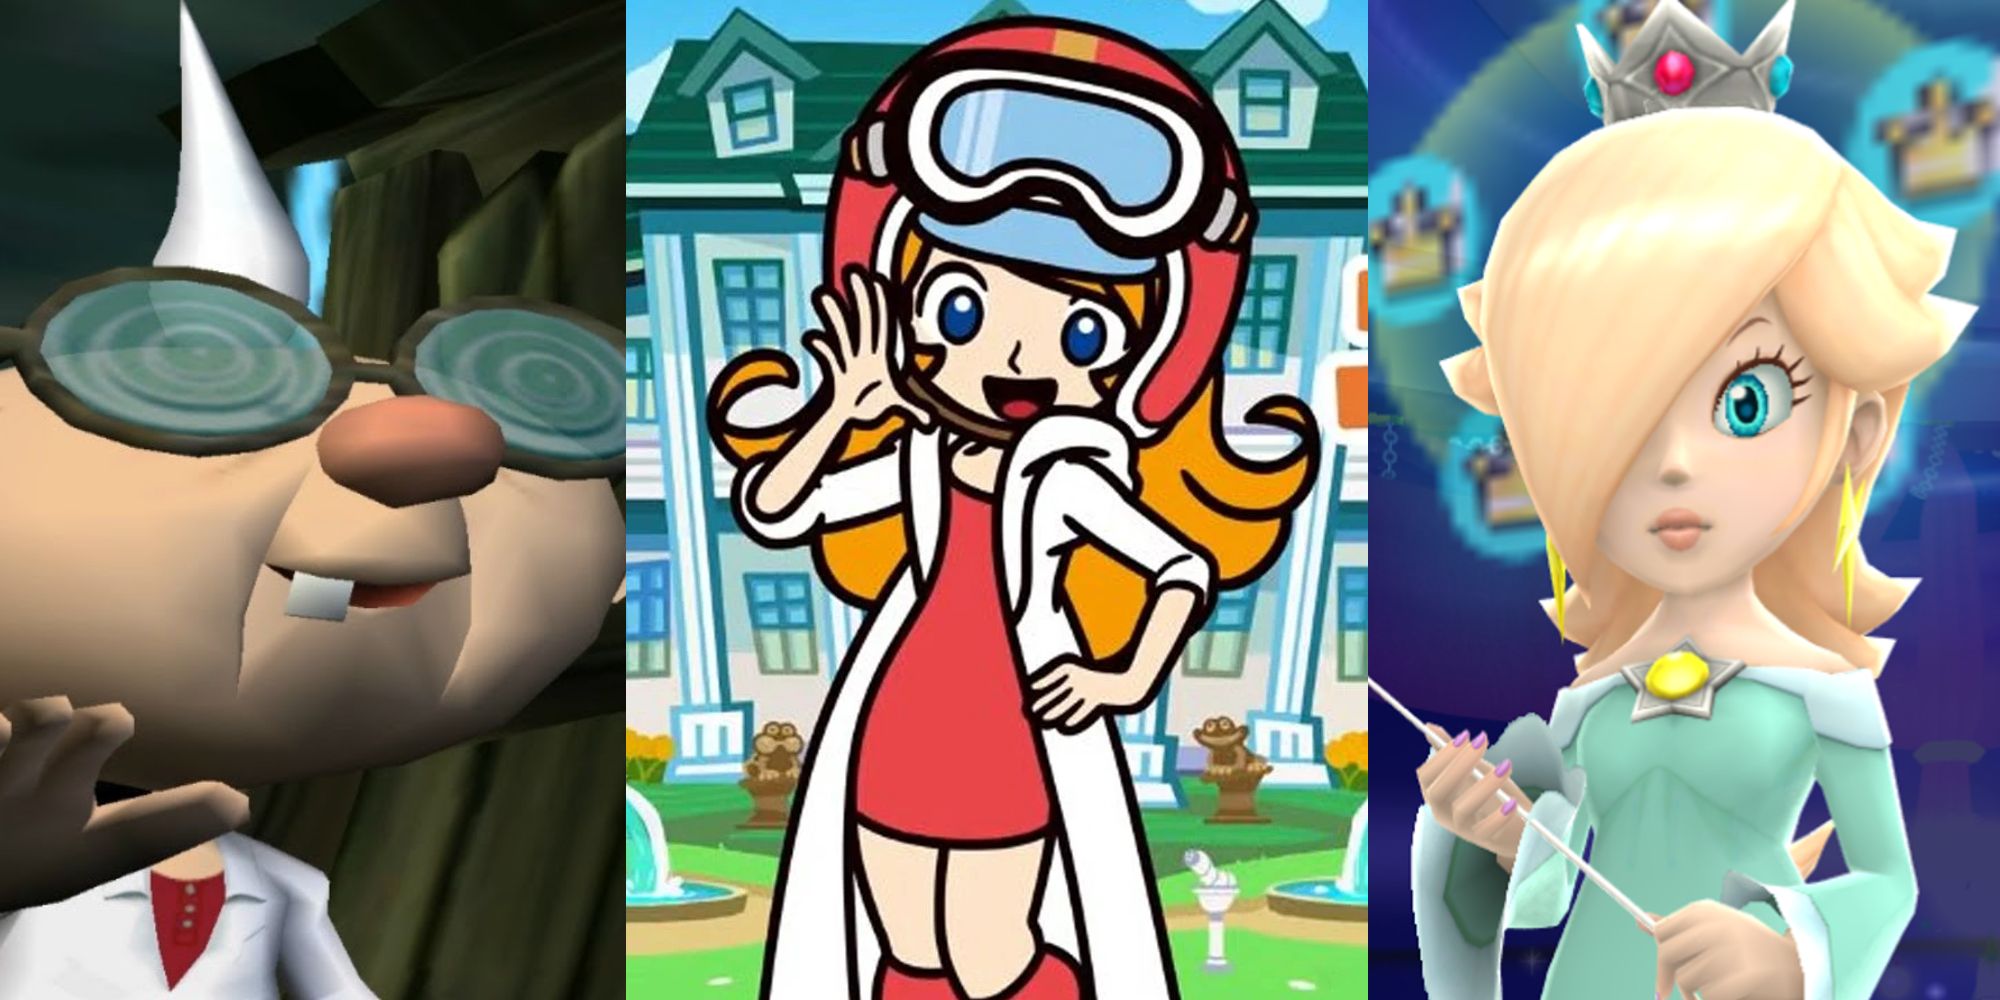 Professor E. Gadd appearing by his shack in Luigi's Mansion; Mona waving in WarioWare Get It Together; Rosalina with her wand in the Comet Observatory 